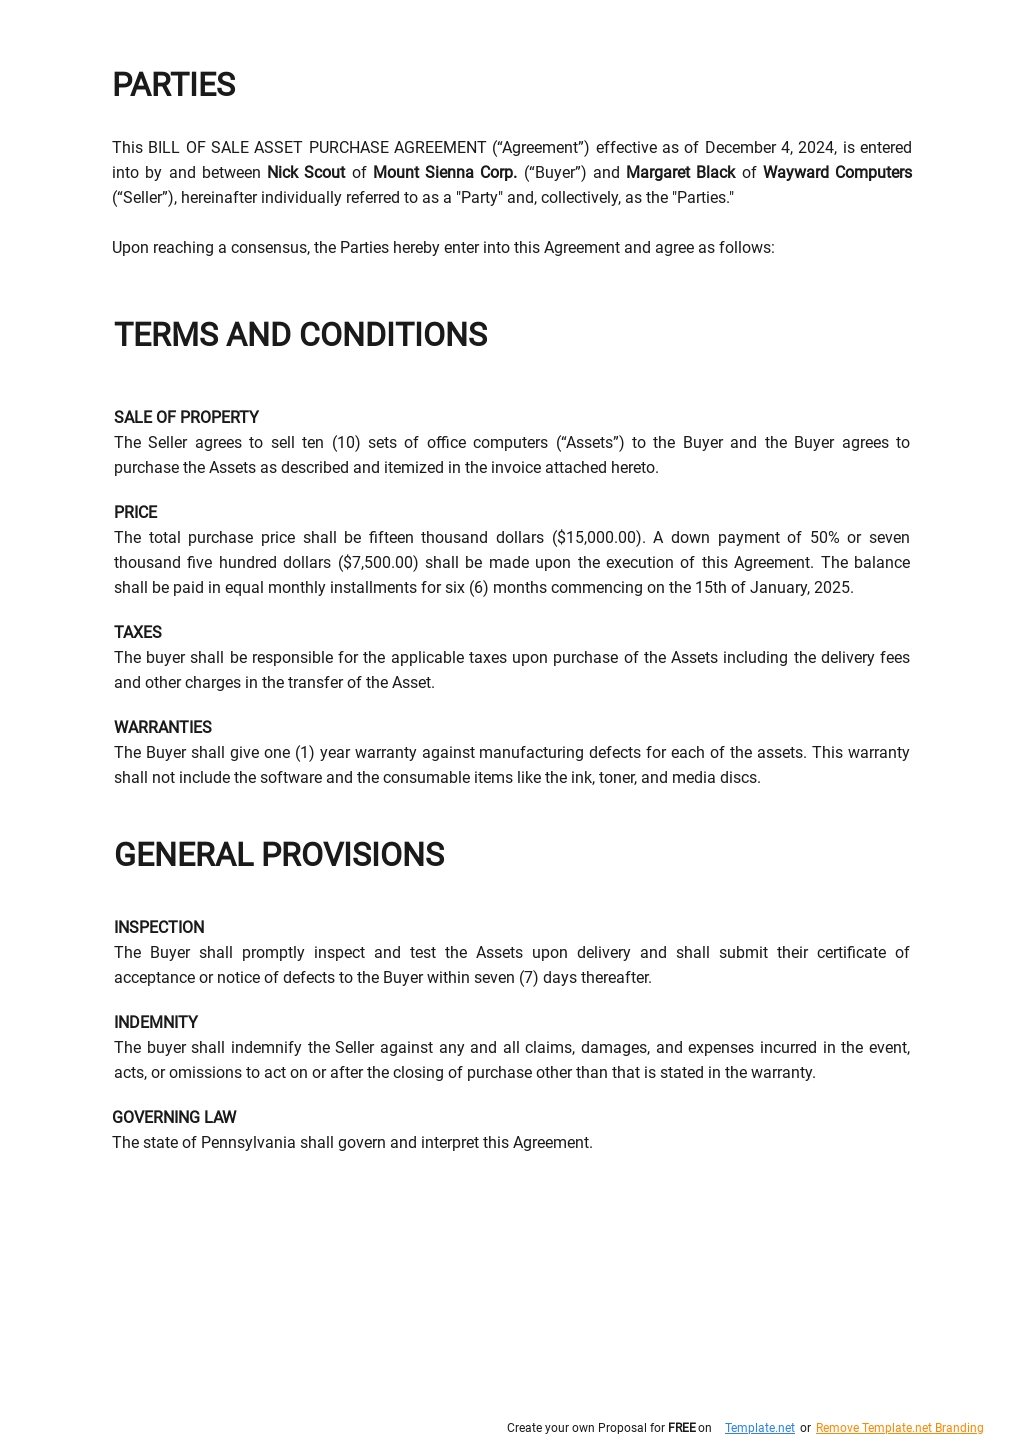 Bill Of Sale Asset Purchase Agreement Template 1.jpe